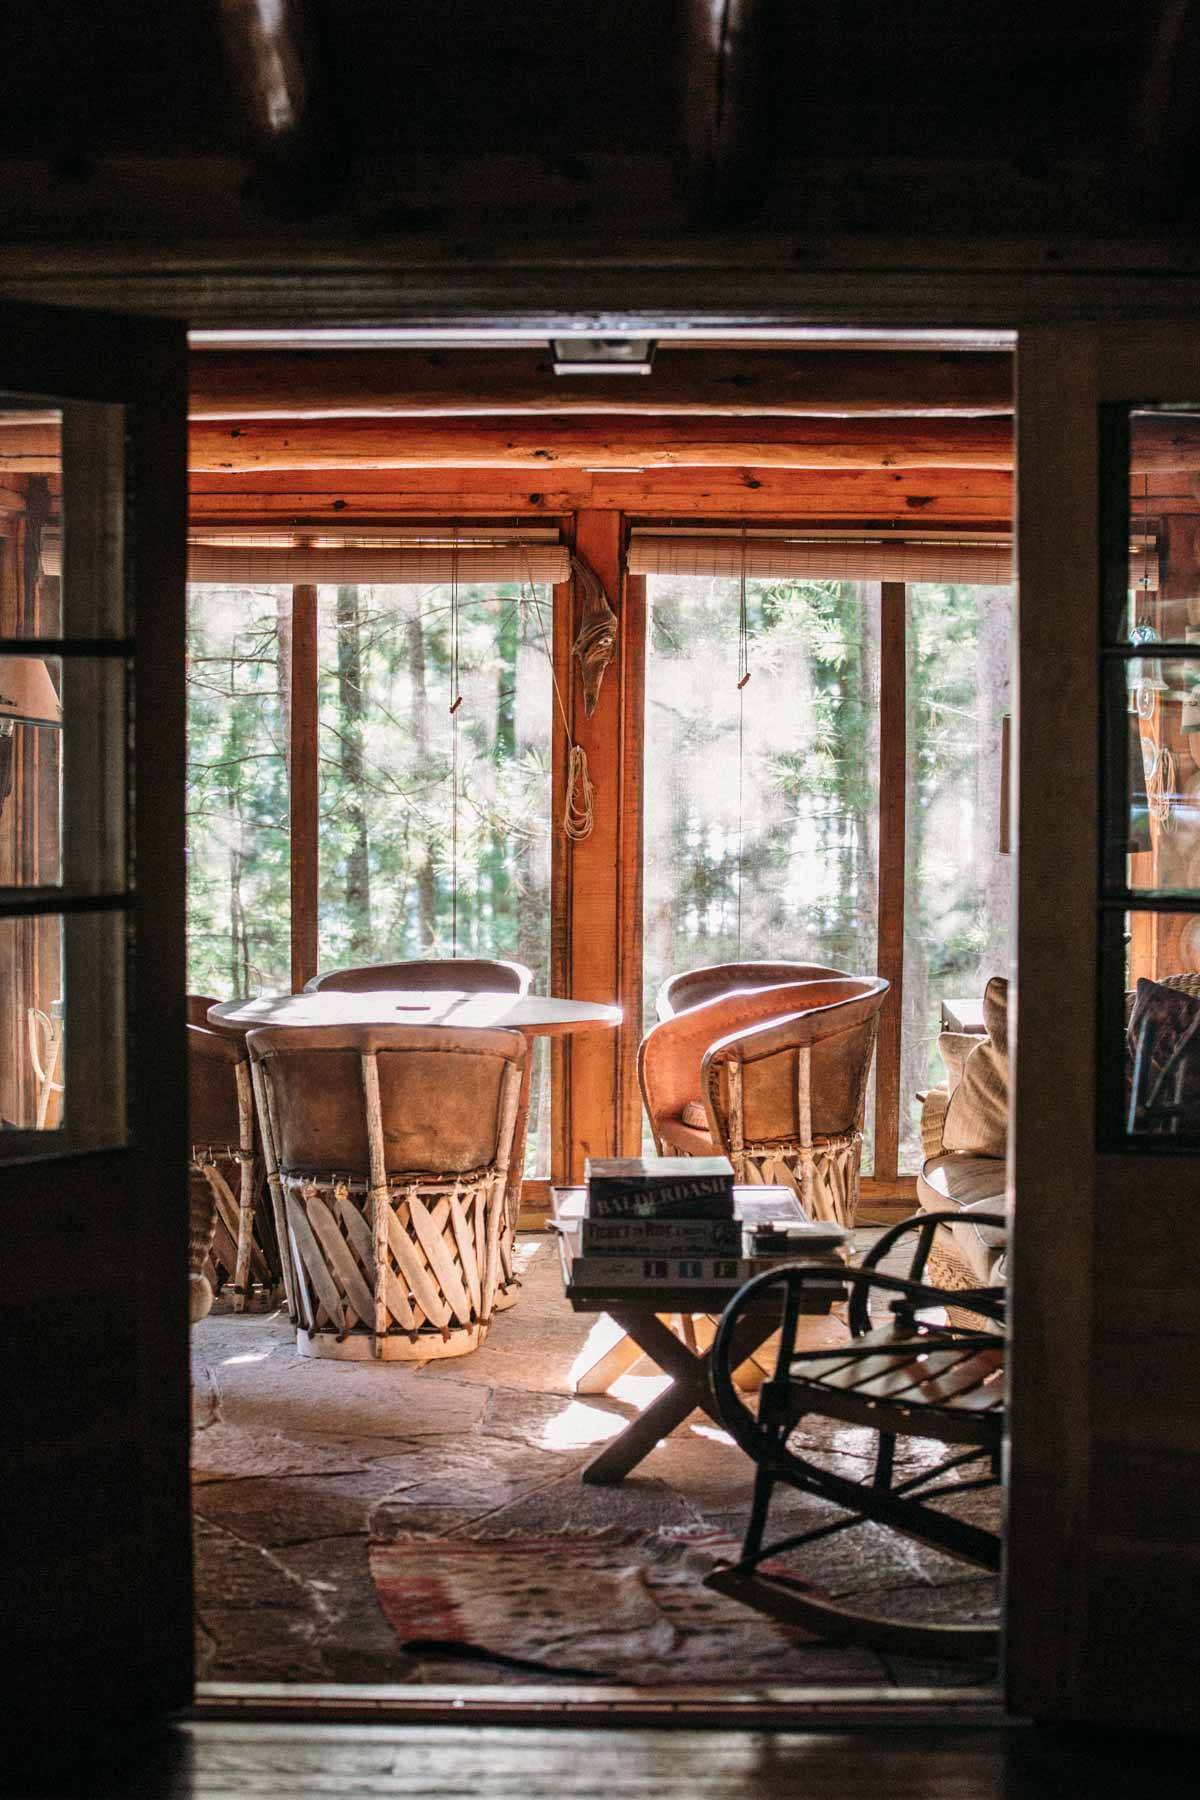 Chairs in a cabin.